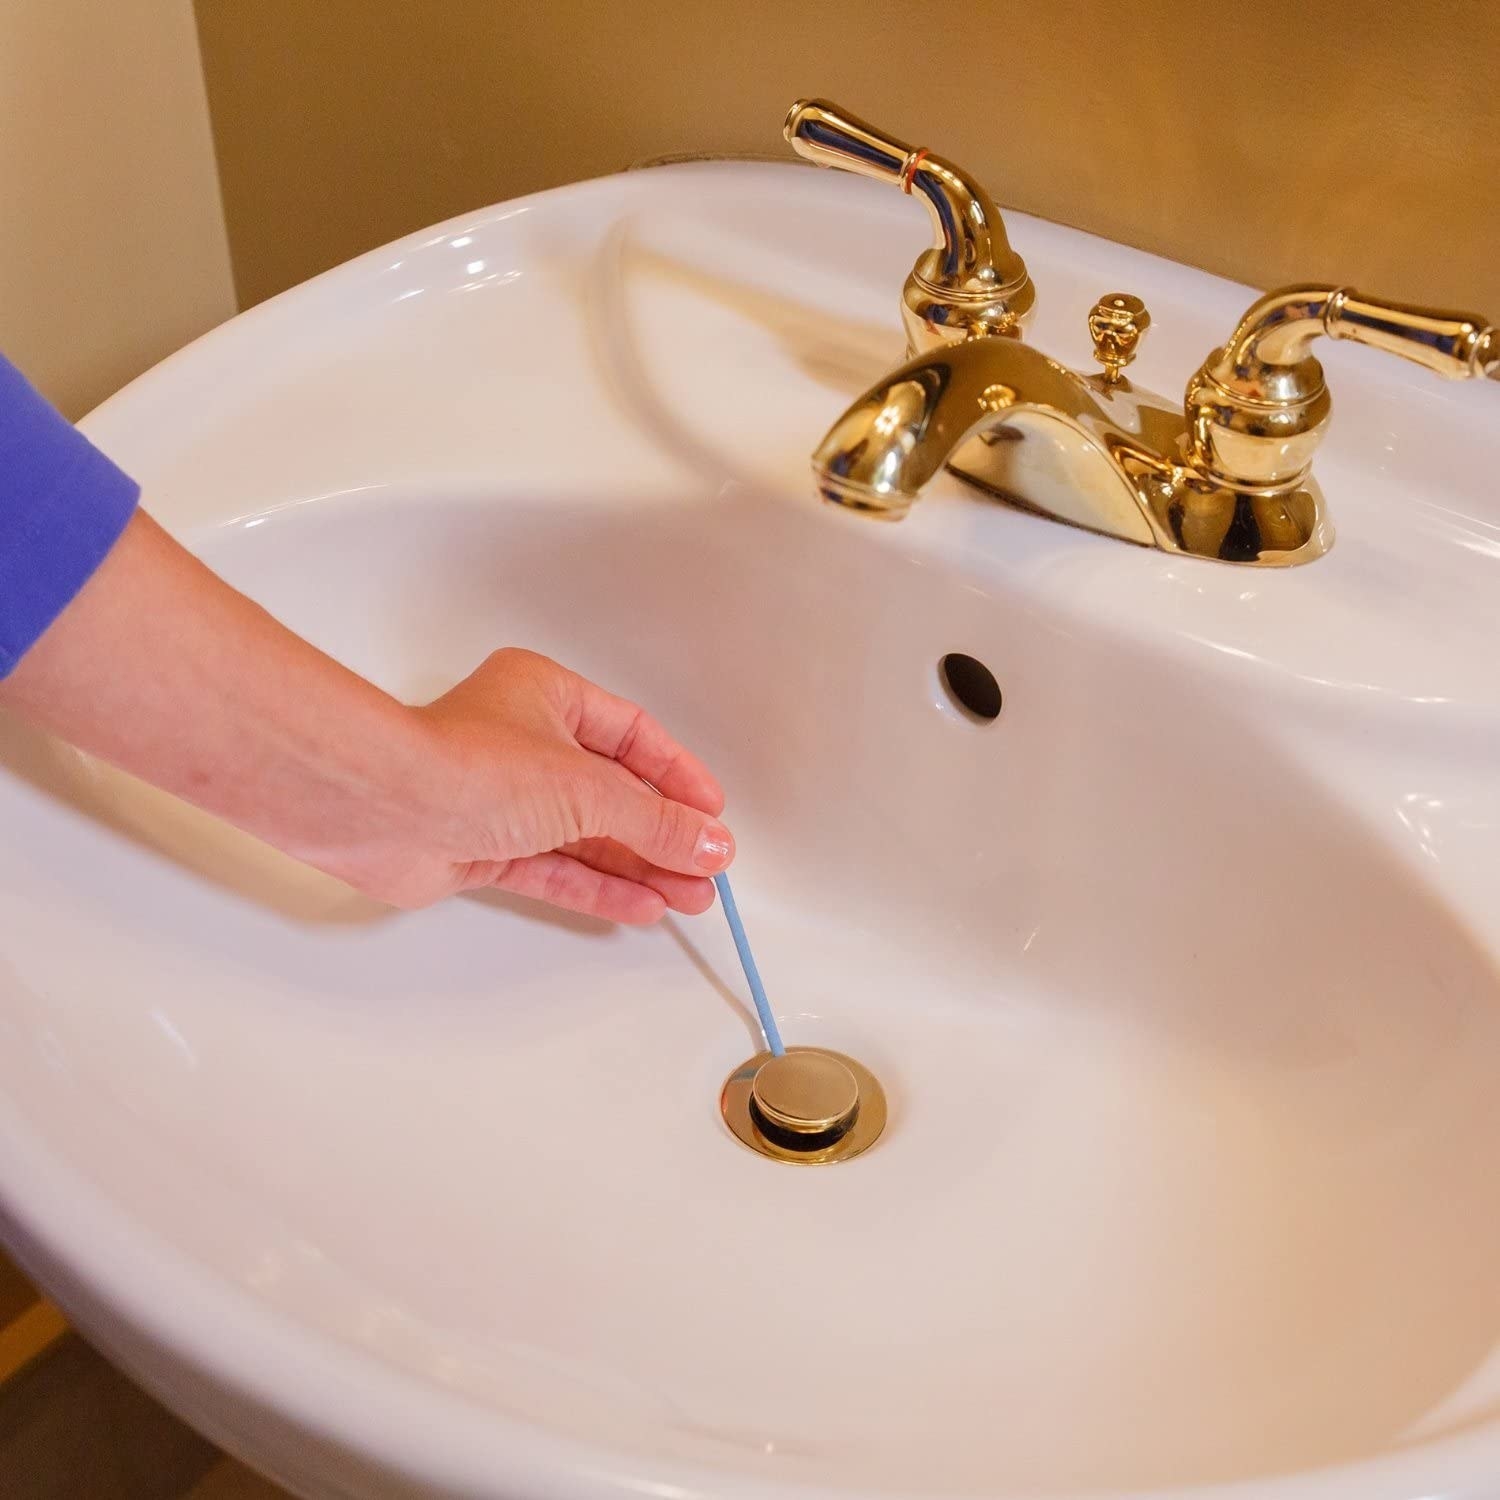 Someone inserting one of the deodorizing sticks into a sink drain